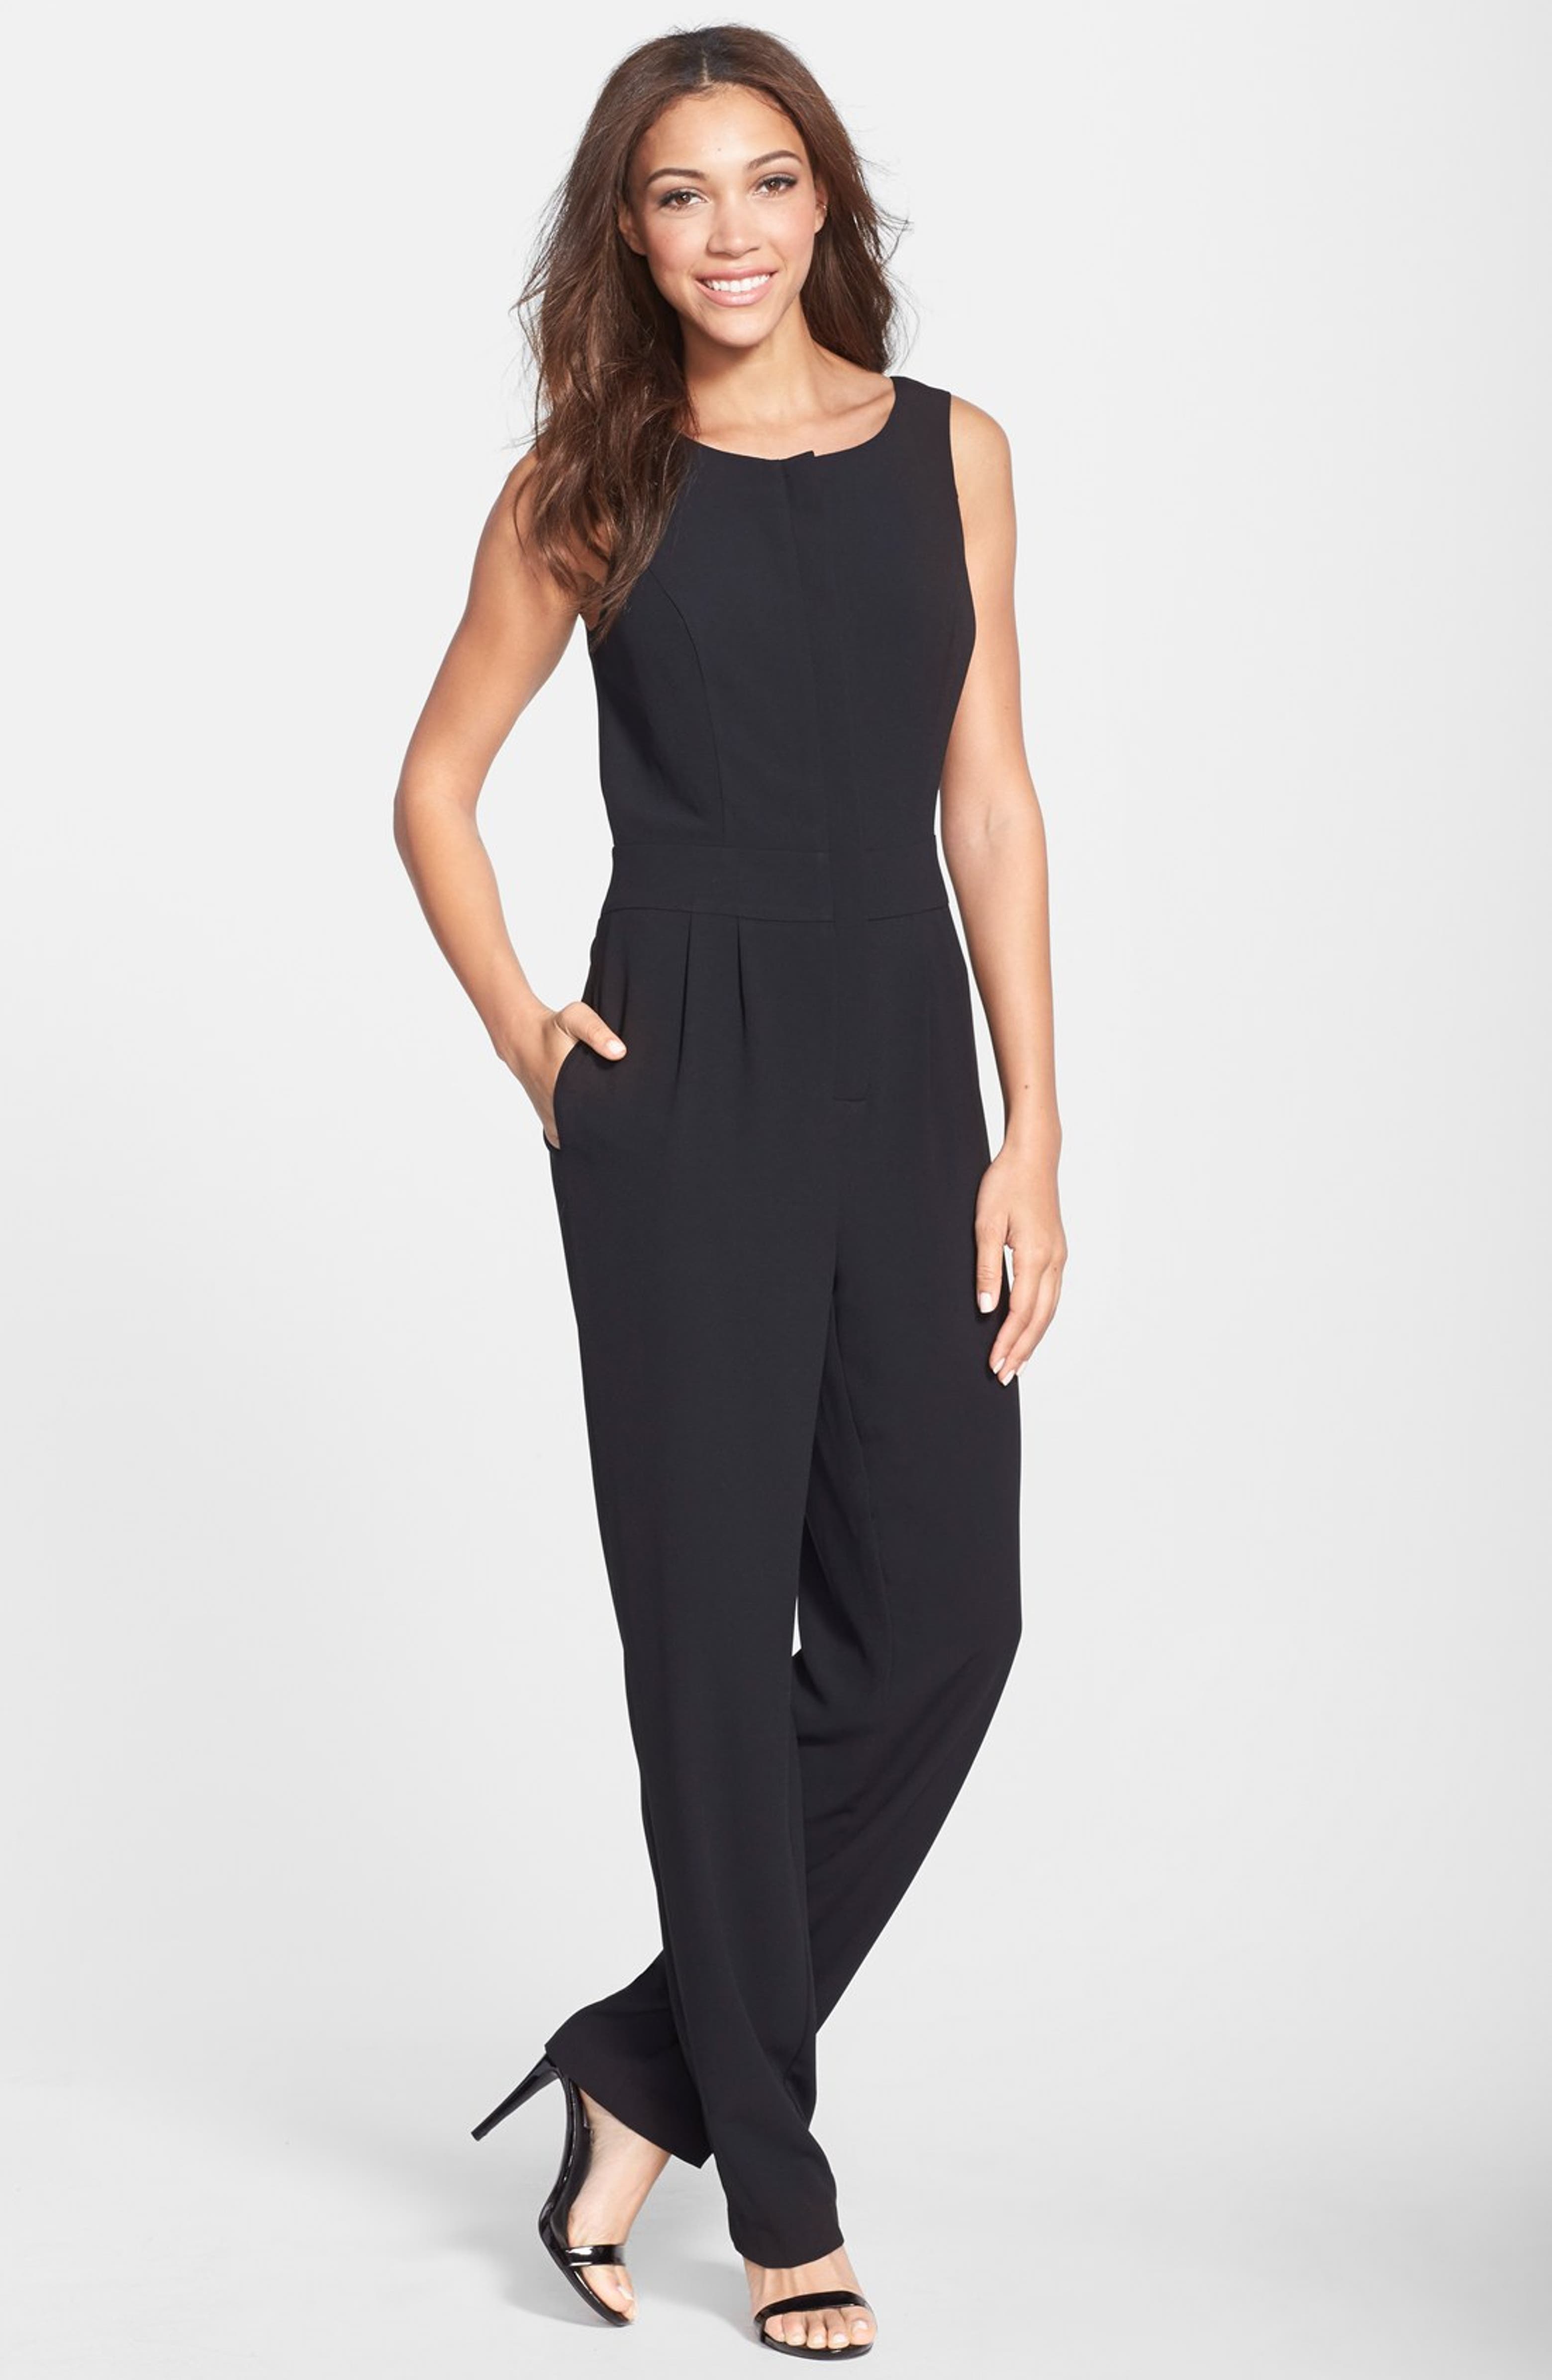 Vince Camuto Back Cutout Sleeveless Jumpsuit | Nordstrom